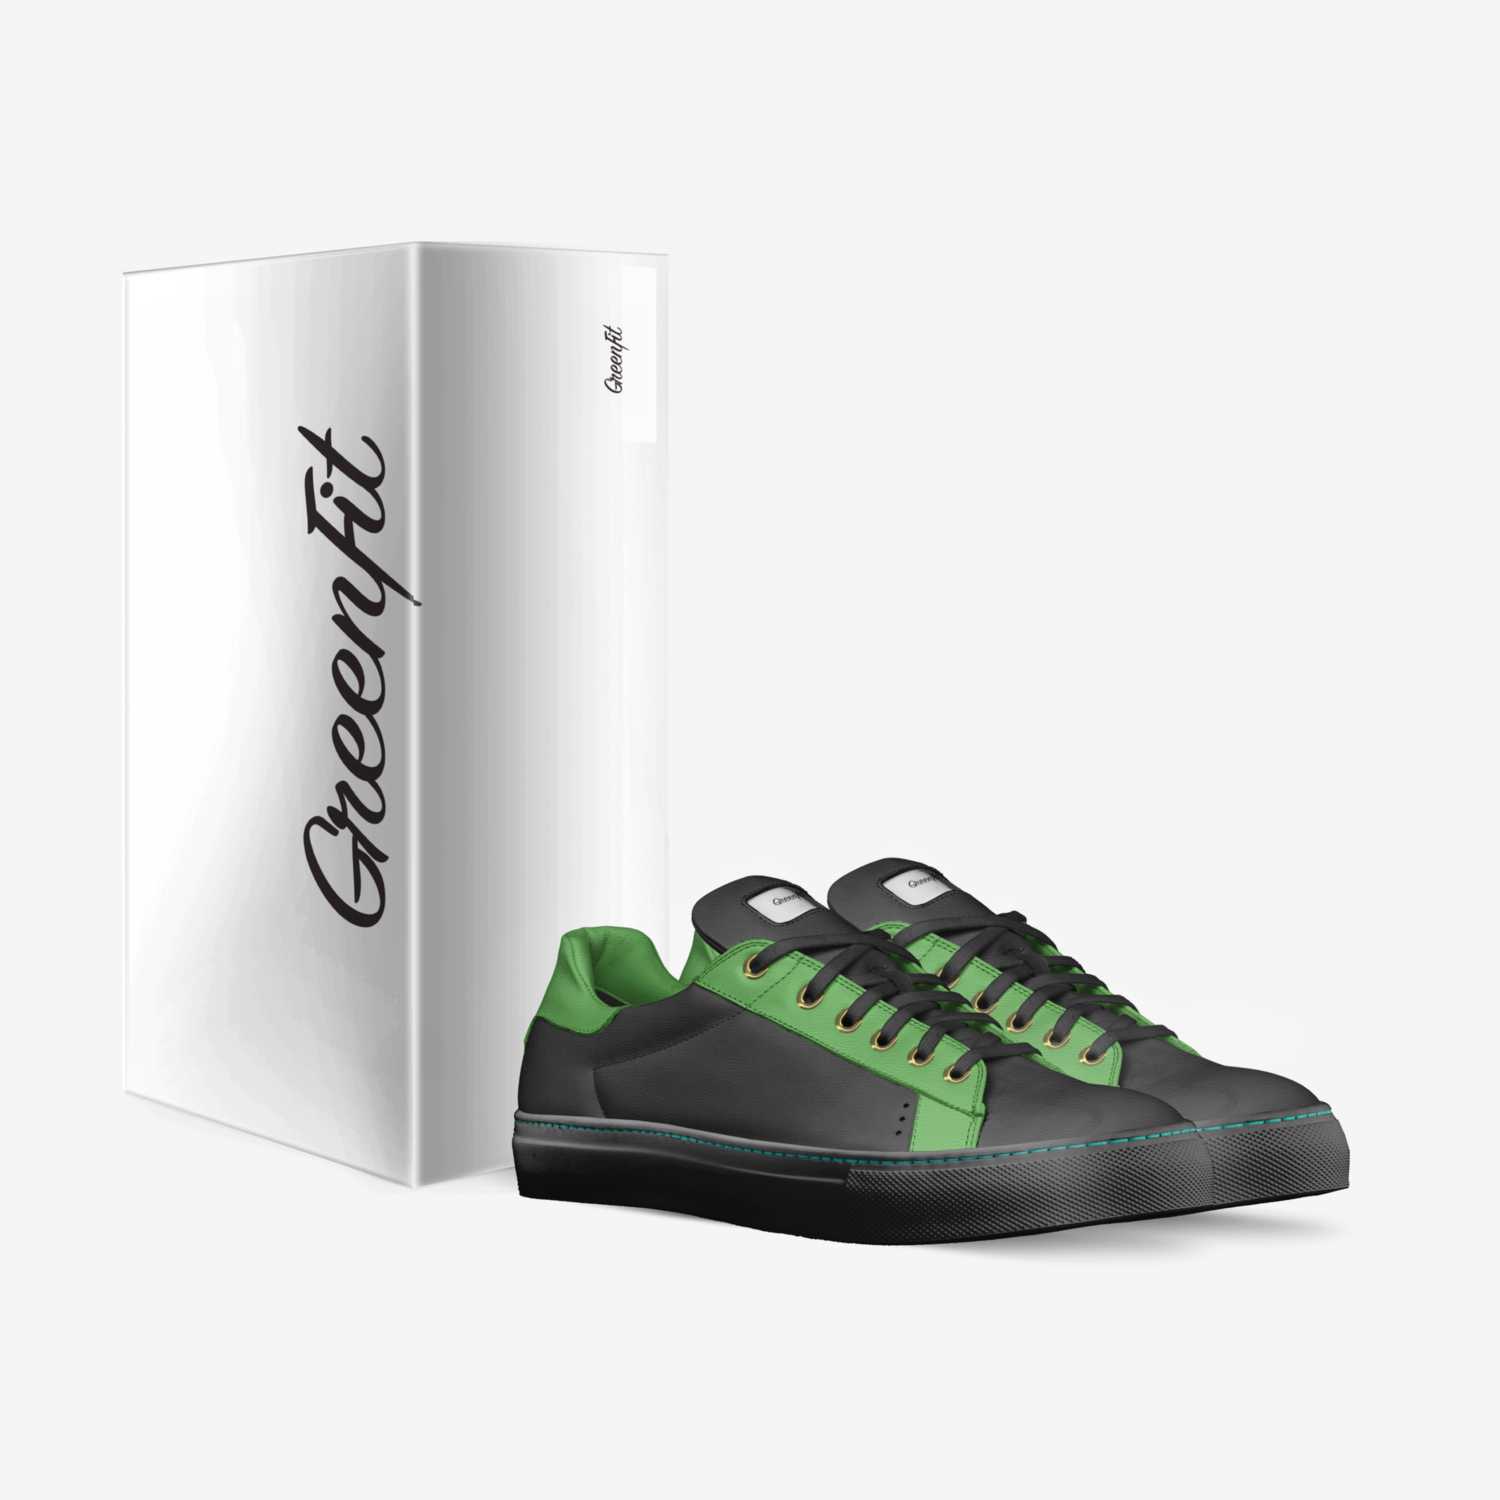 GreenFit custom made in Italy shoes by Shenique Clarke | Box view